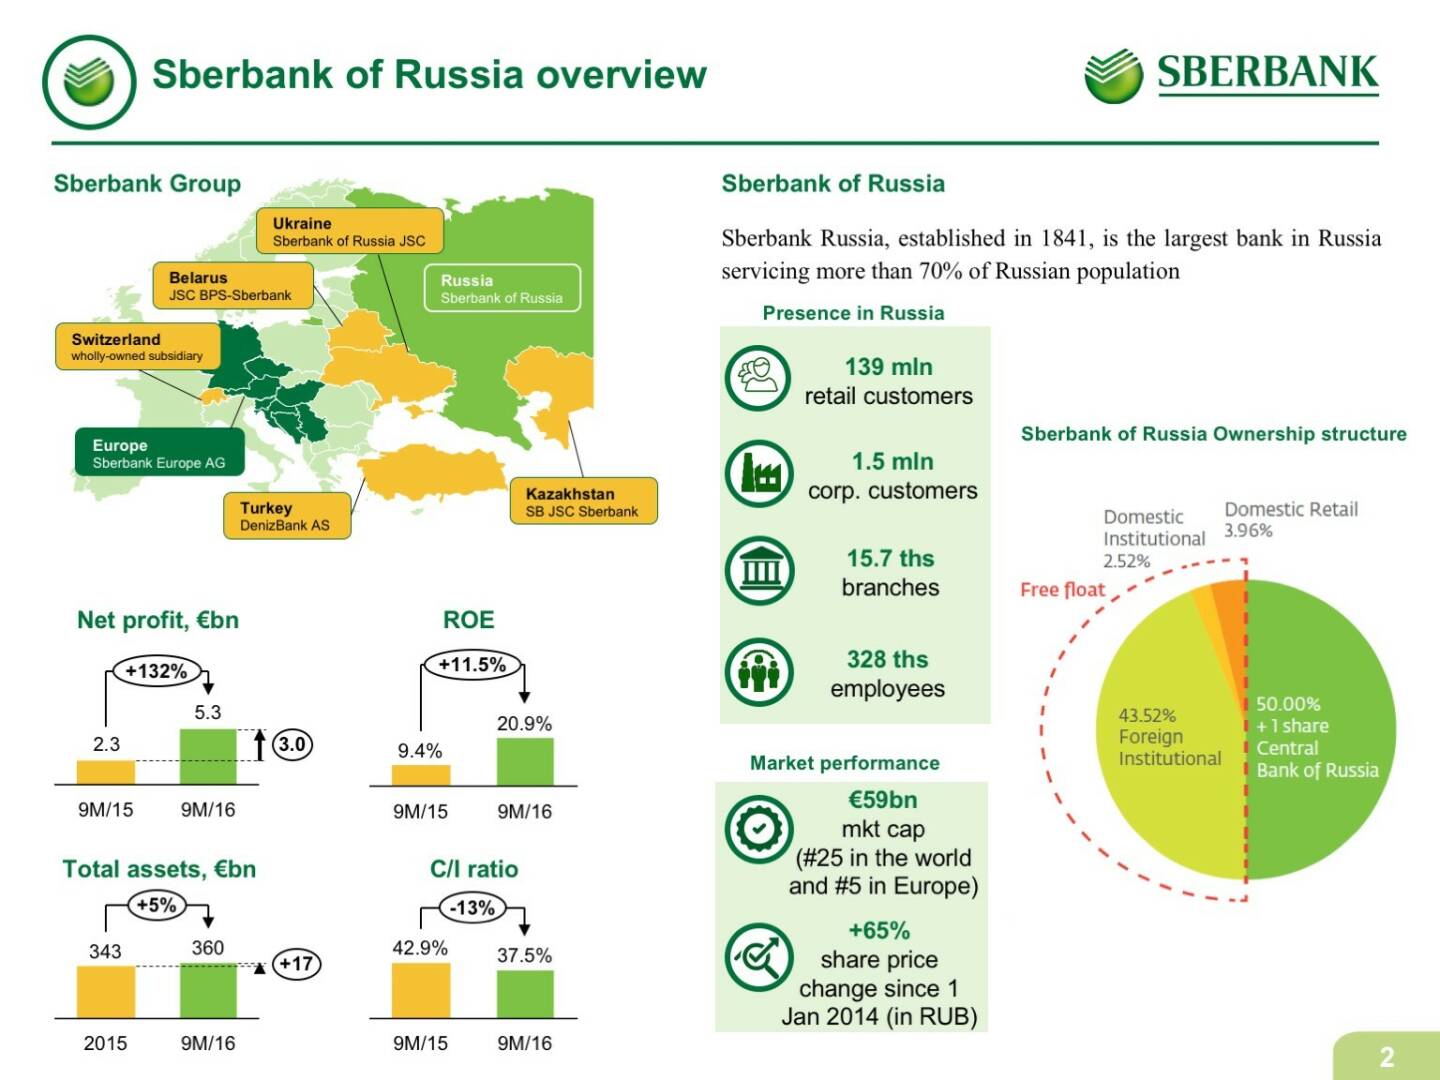 Sberbank of Russia overview